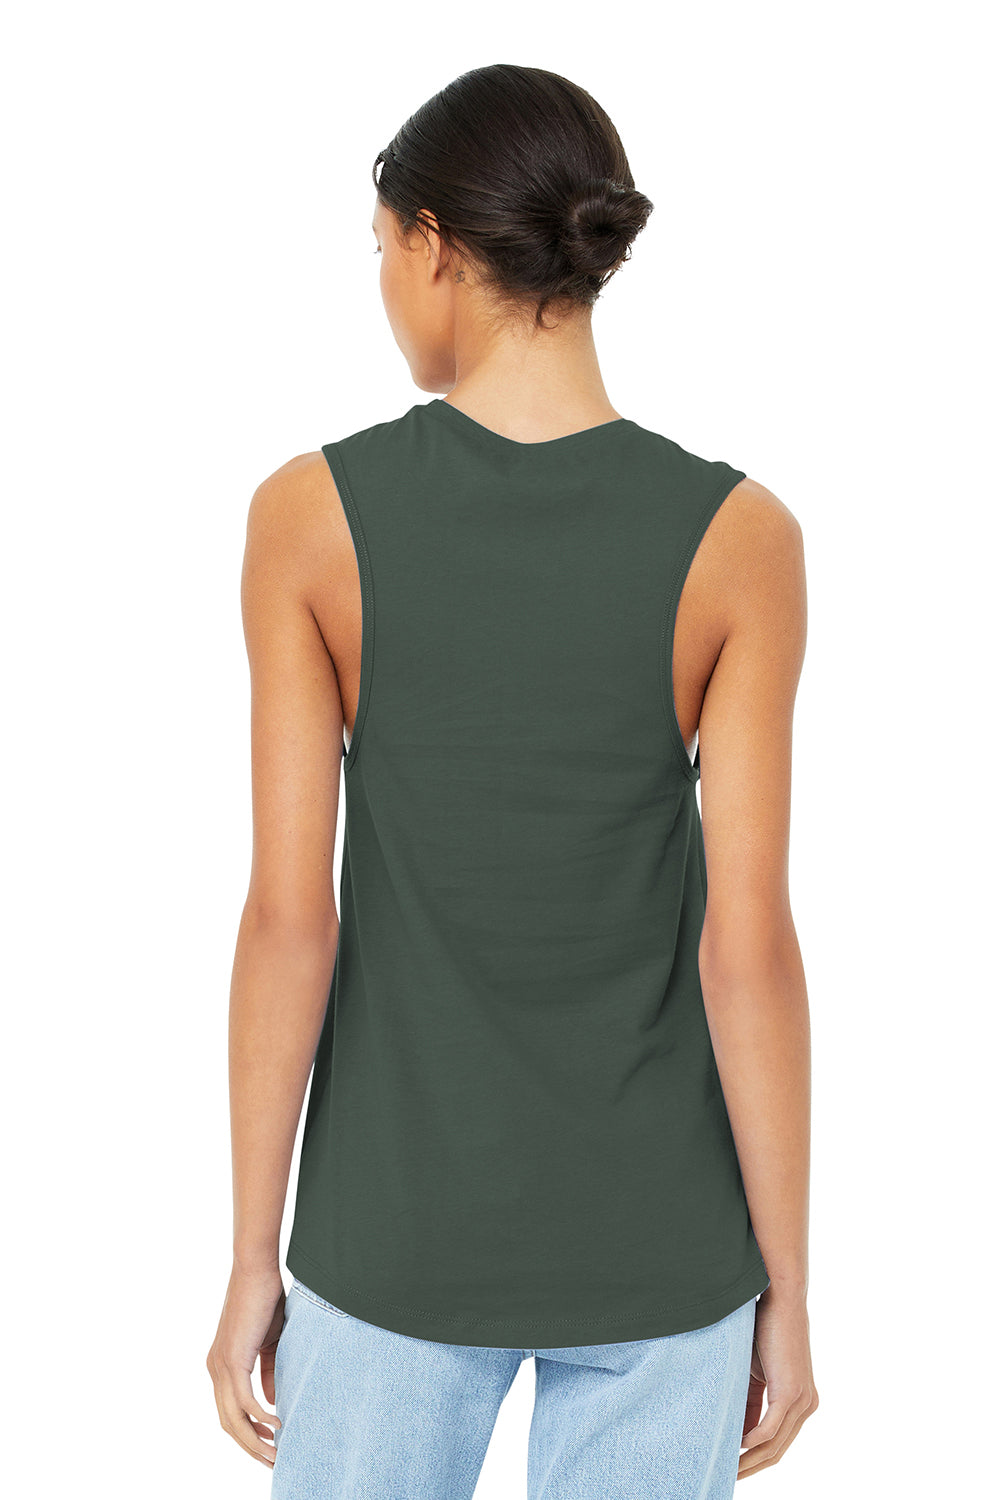 Bella + Canvas BC6003/B6003/6003 Womens Jersey Muscle Tank Top Military Green Model Back